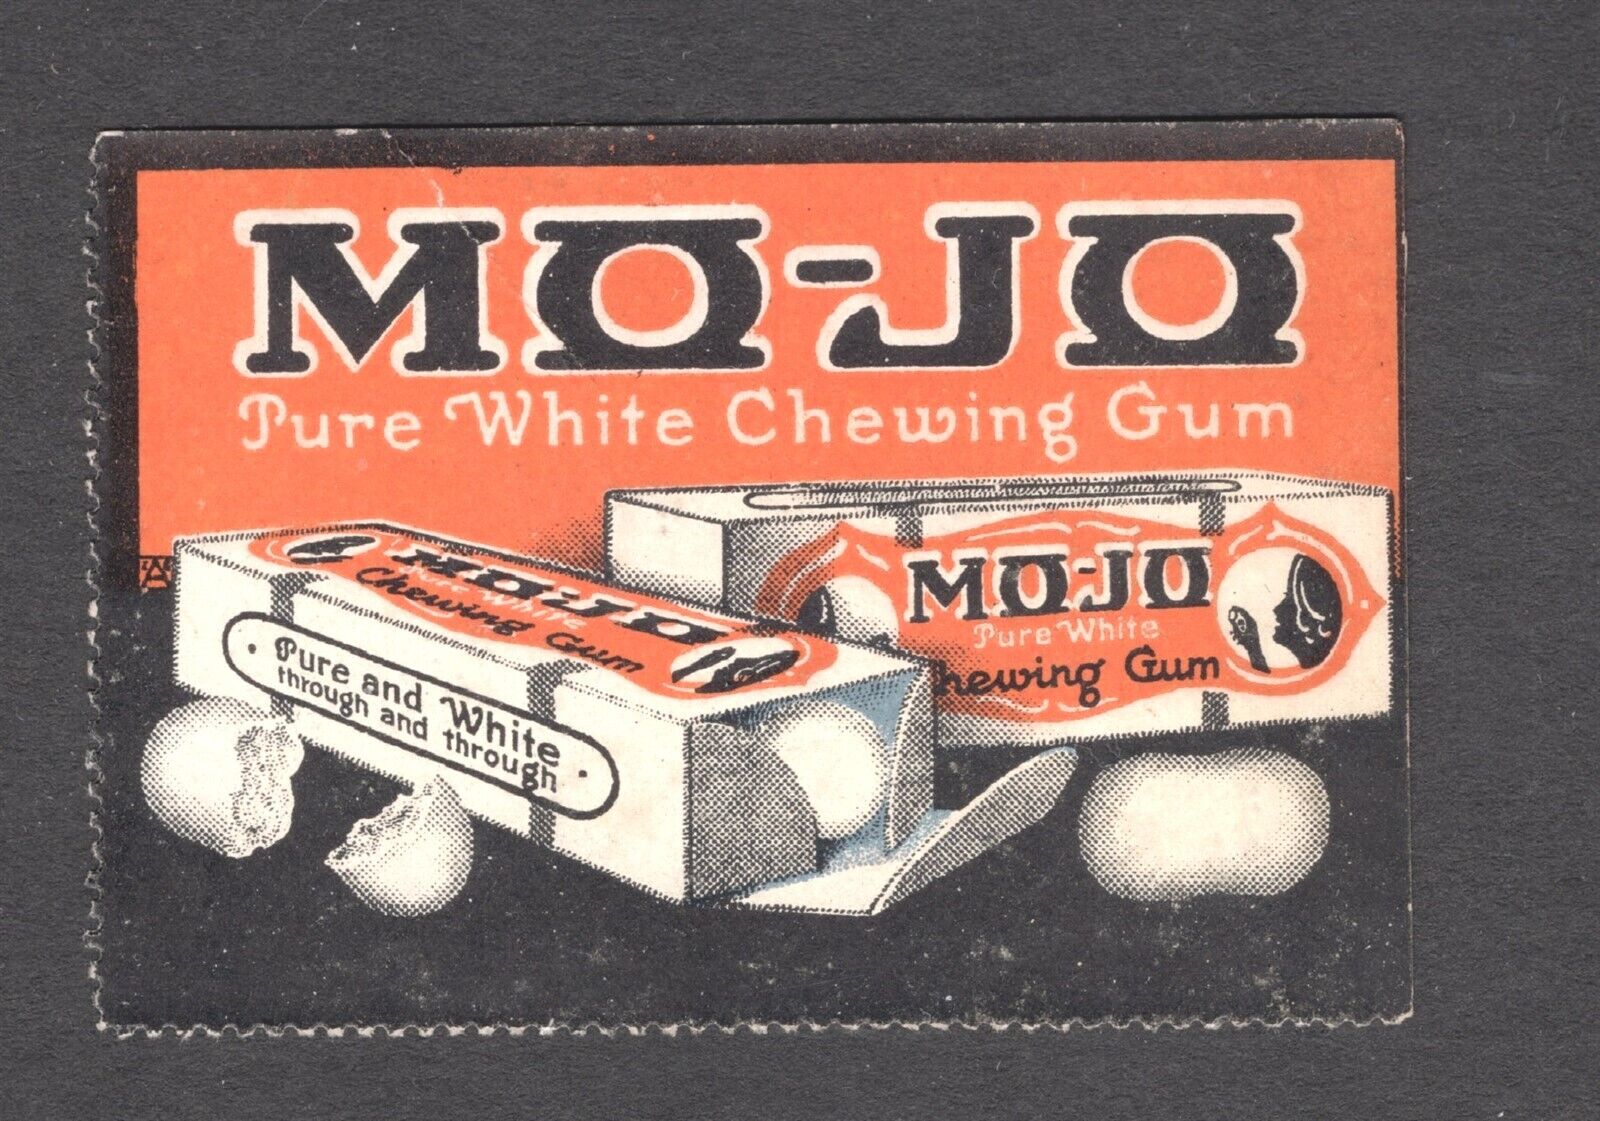 MO-JO CHEWING GUM POSTER STAMP #1